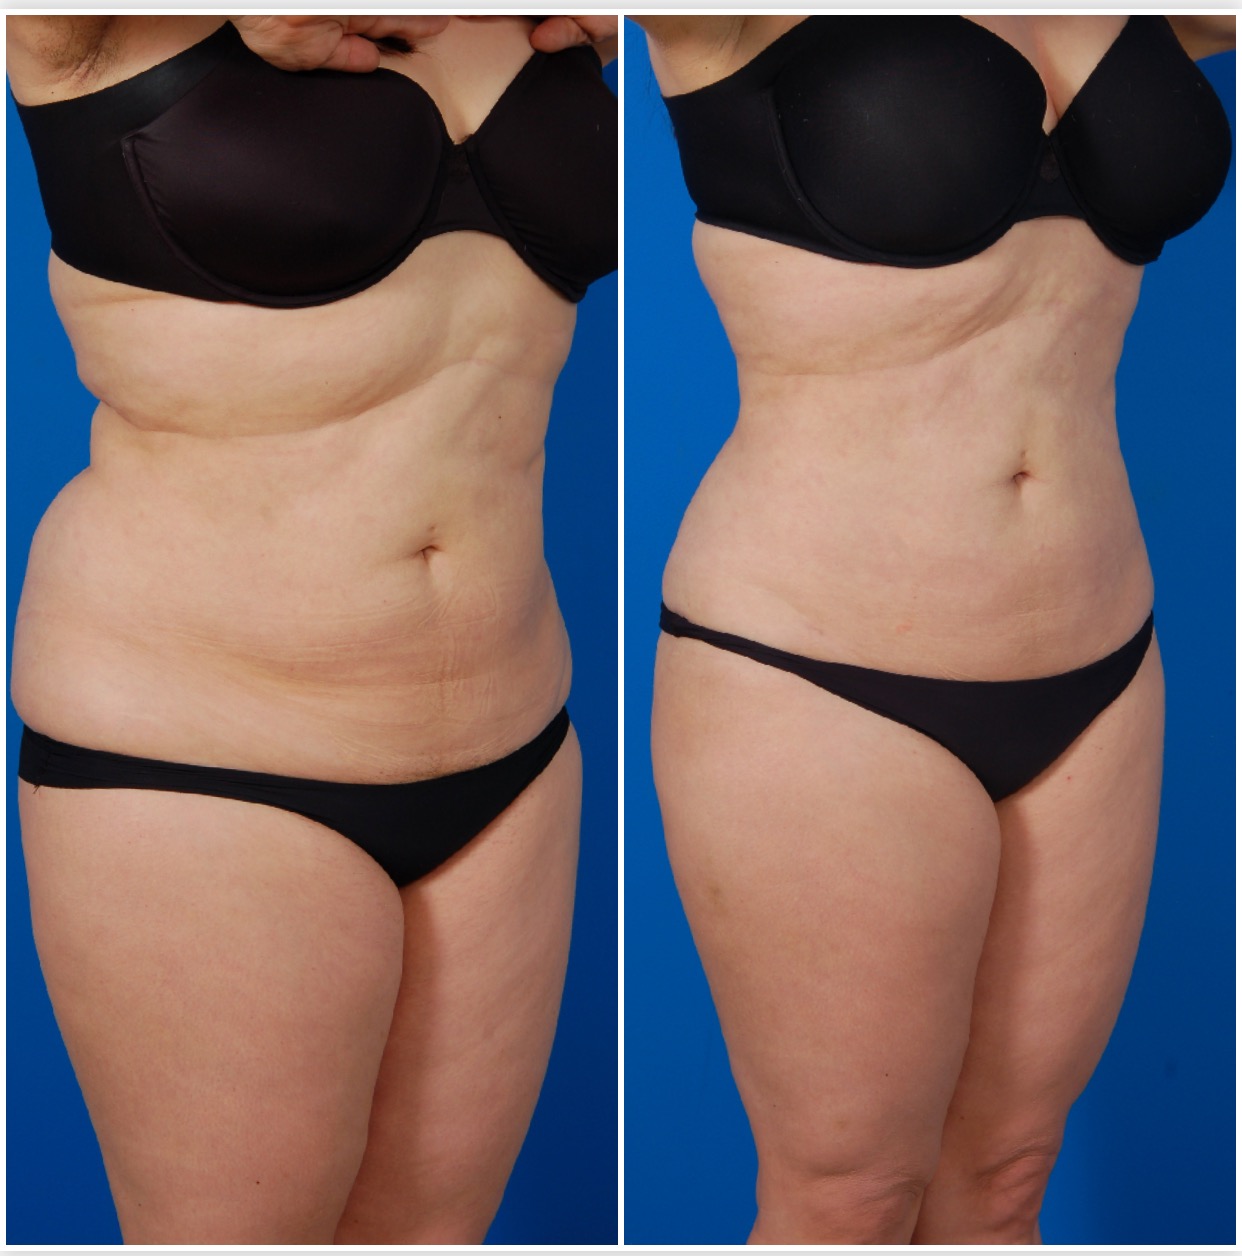 Woman's body, before and after Liposuction Revision Surgery, r-side oblique view, patient 1